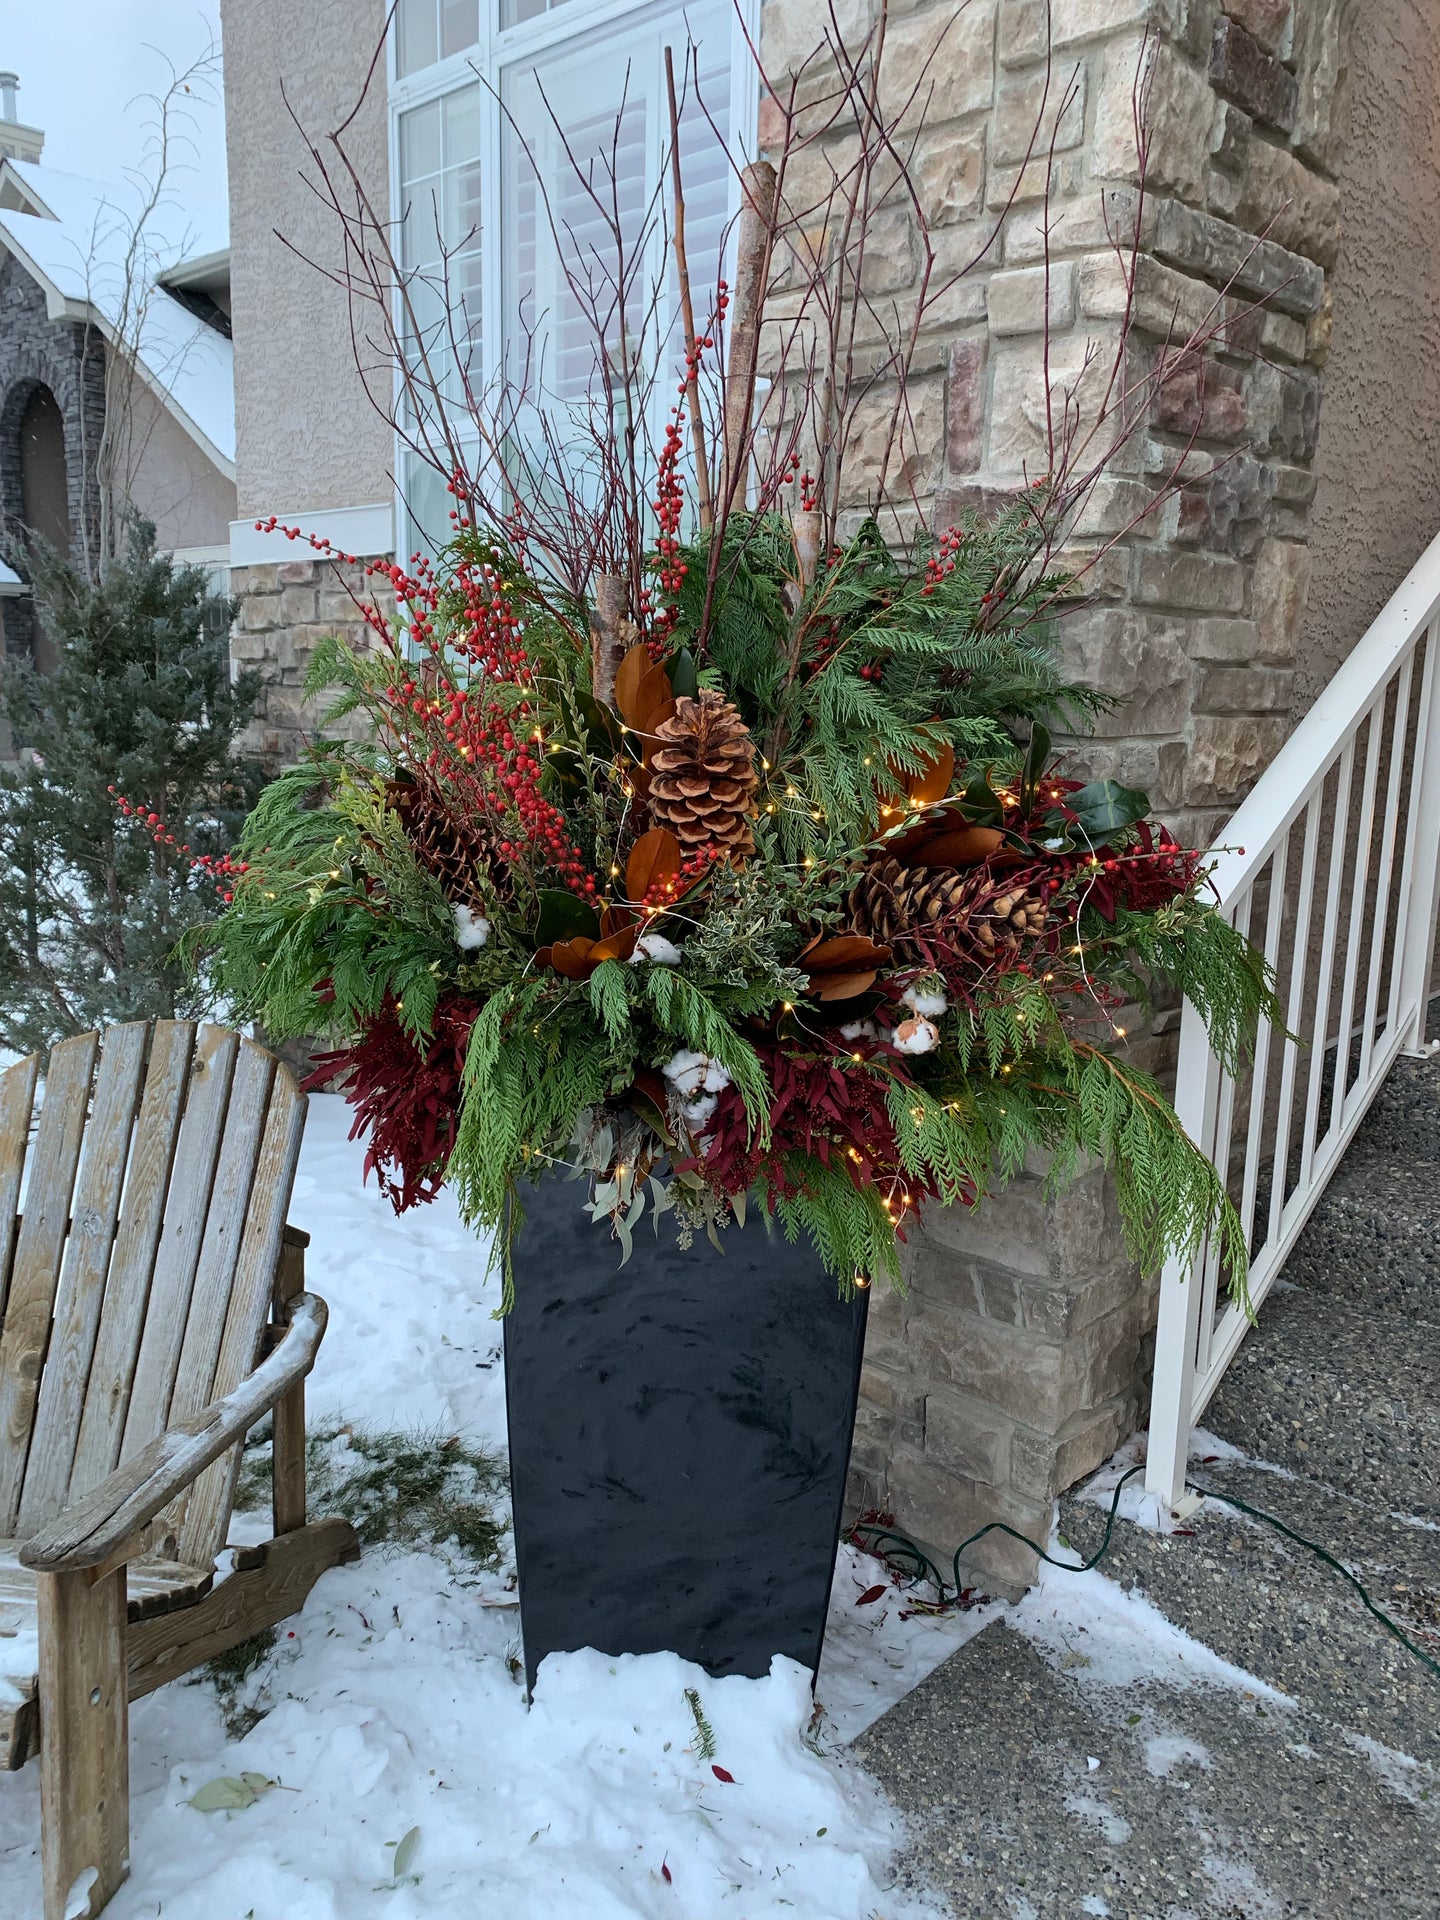 DIY OUTDOOR WINTER PLANTERS - now available for preorder. Pick up Saturday November 19th